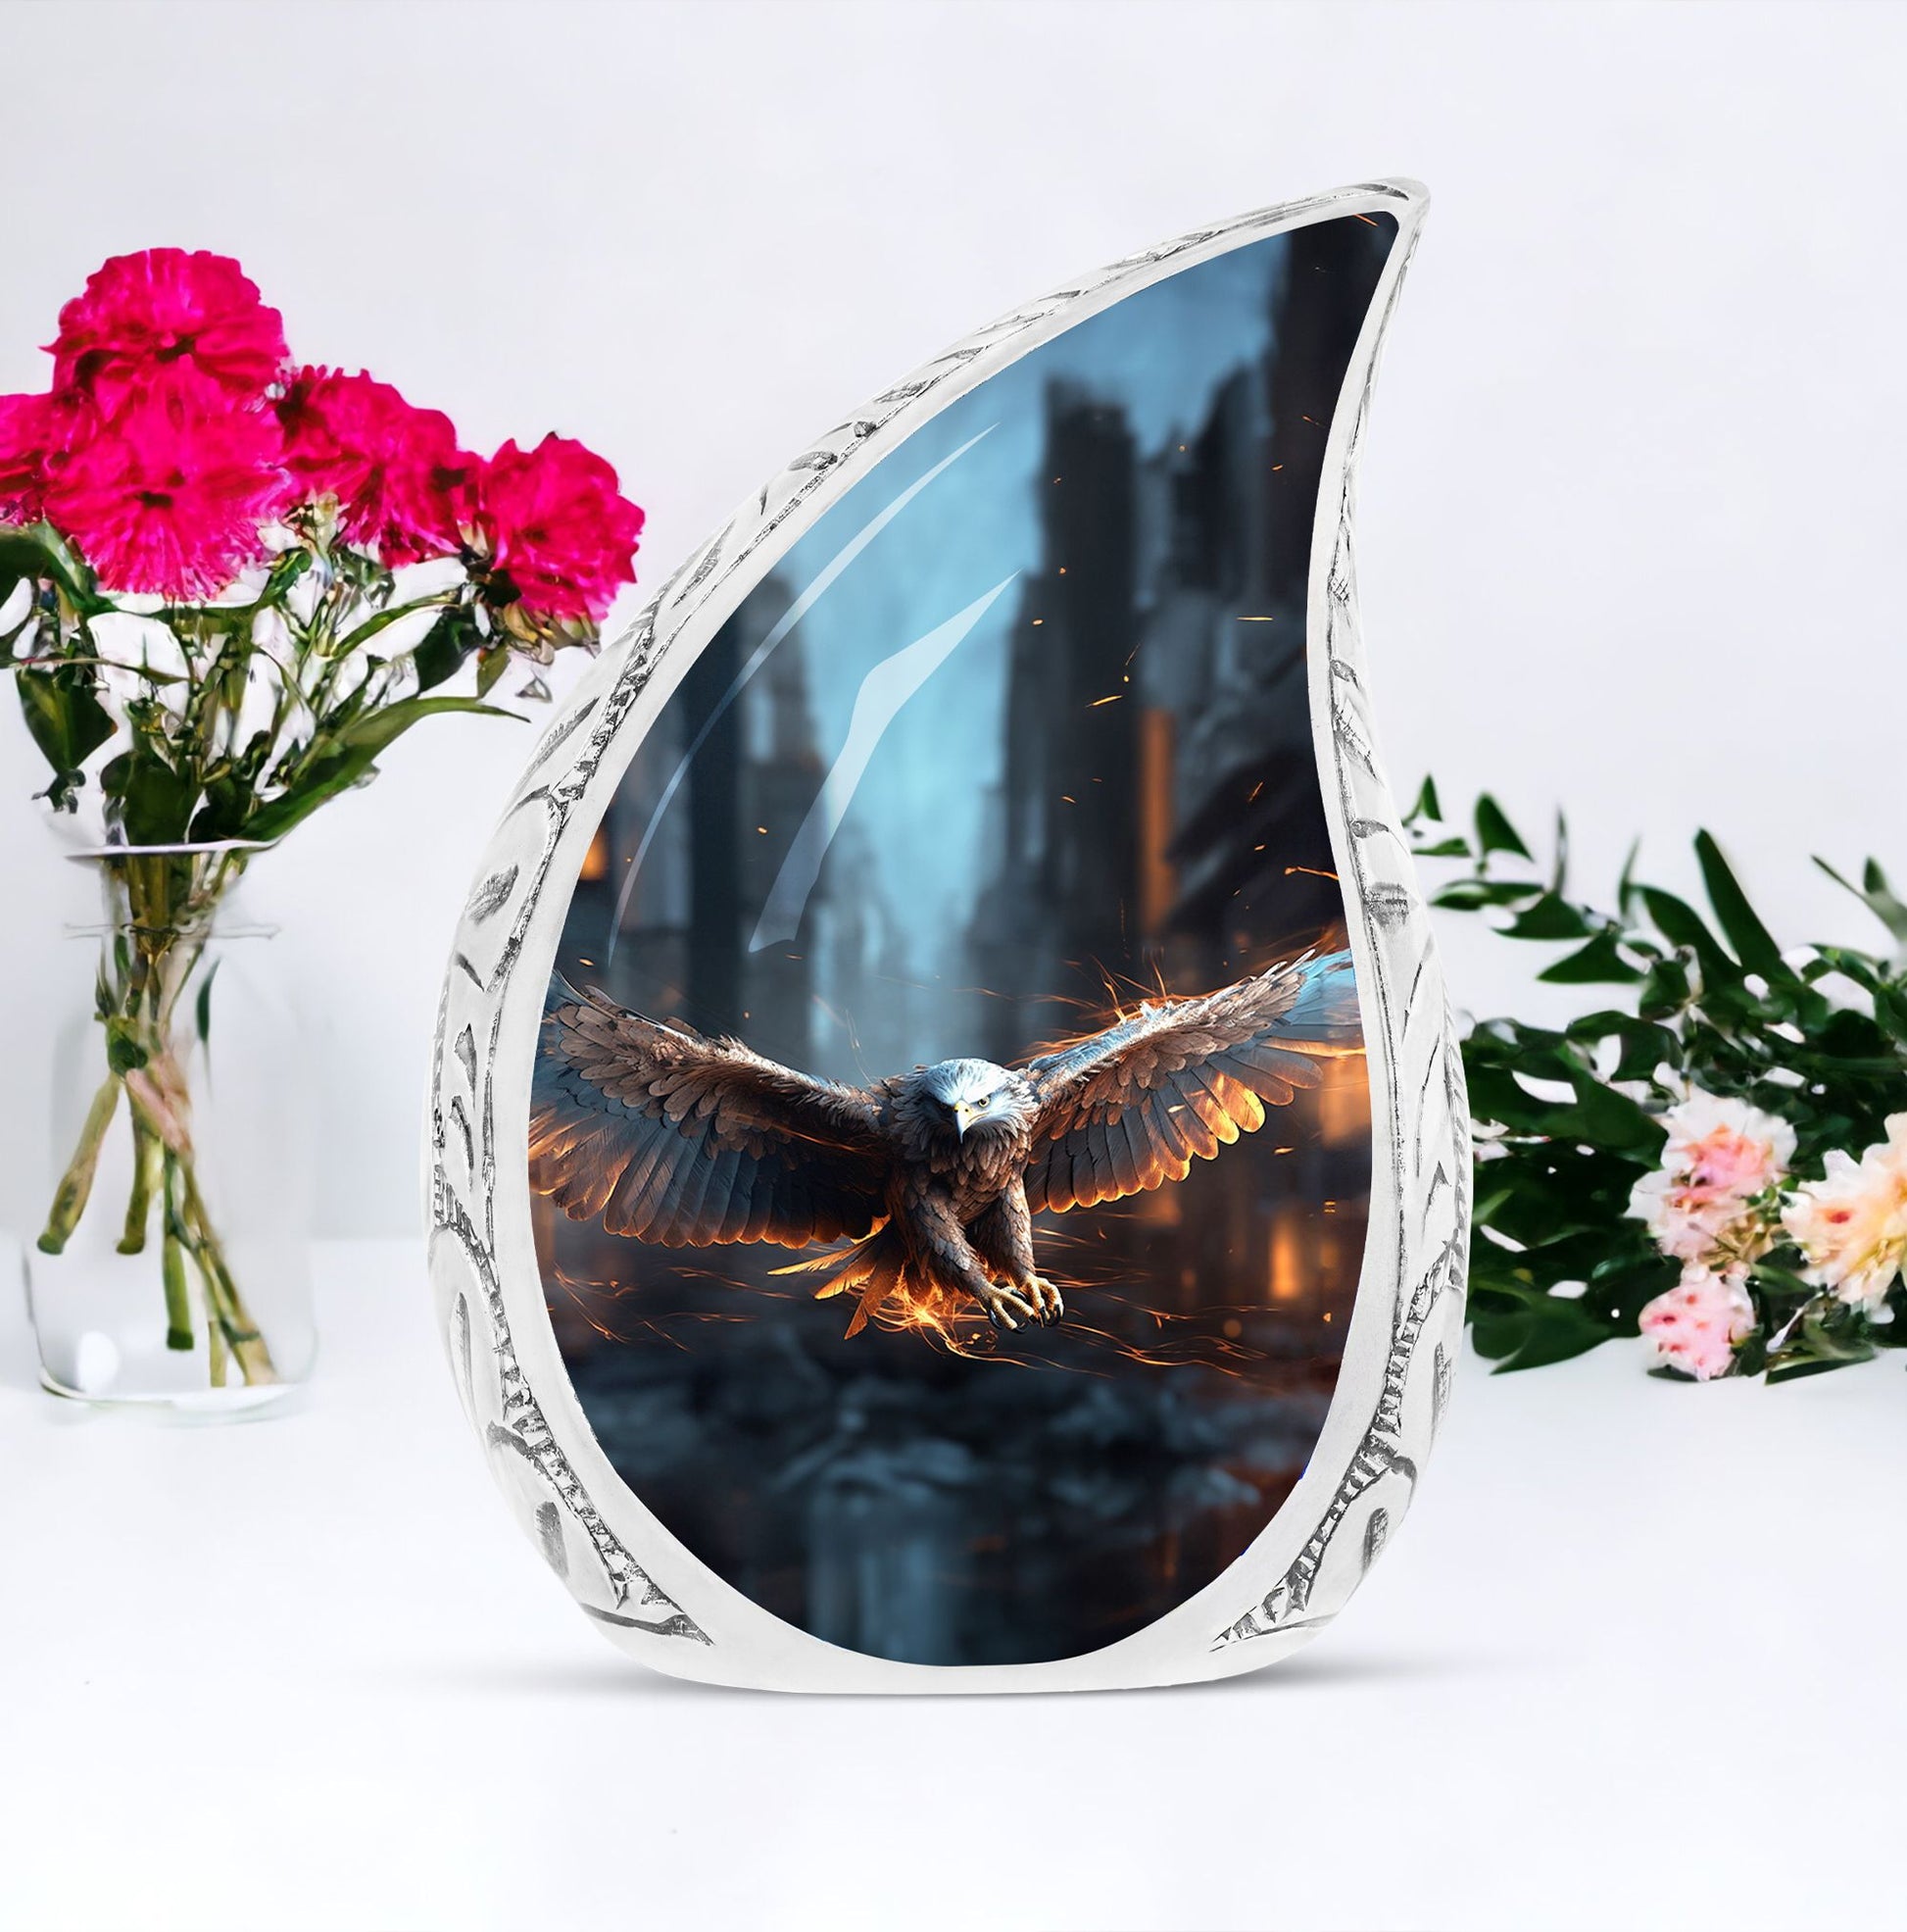 Large Eagle-themed cremation urn, perfect for preserving adult human ashes in a dignified manner